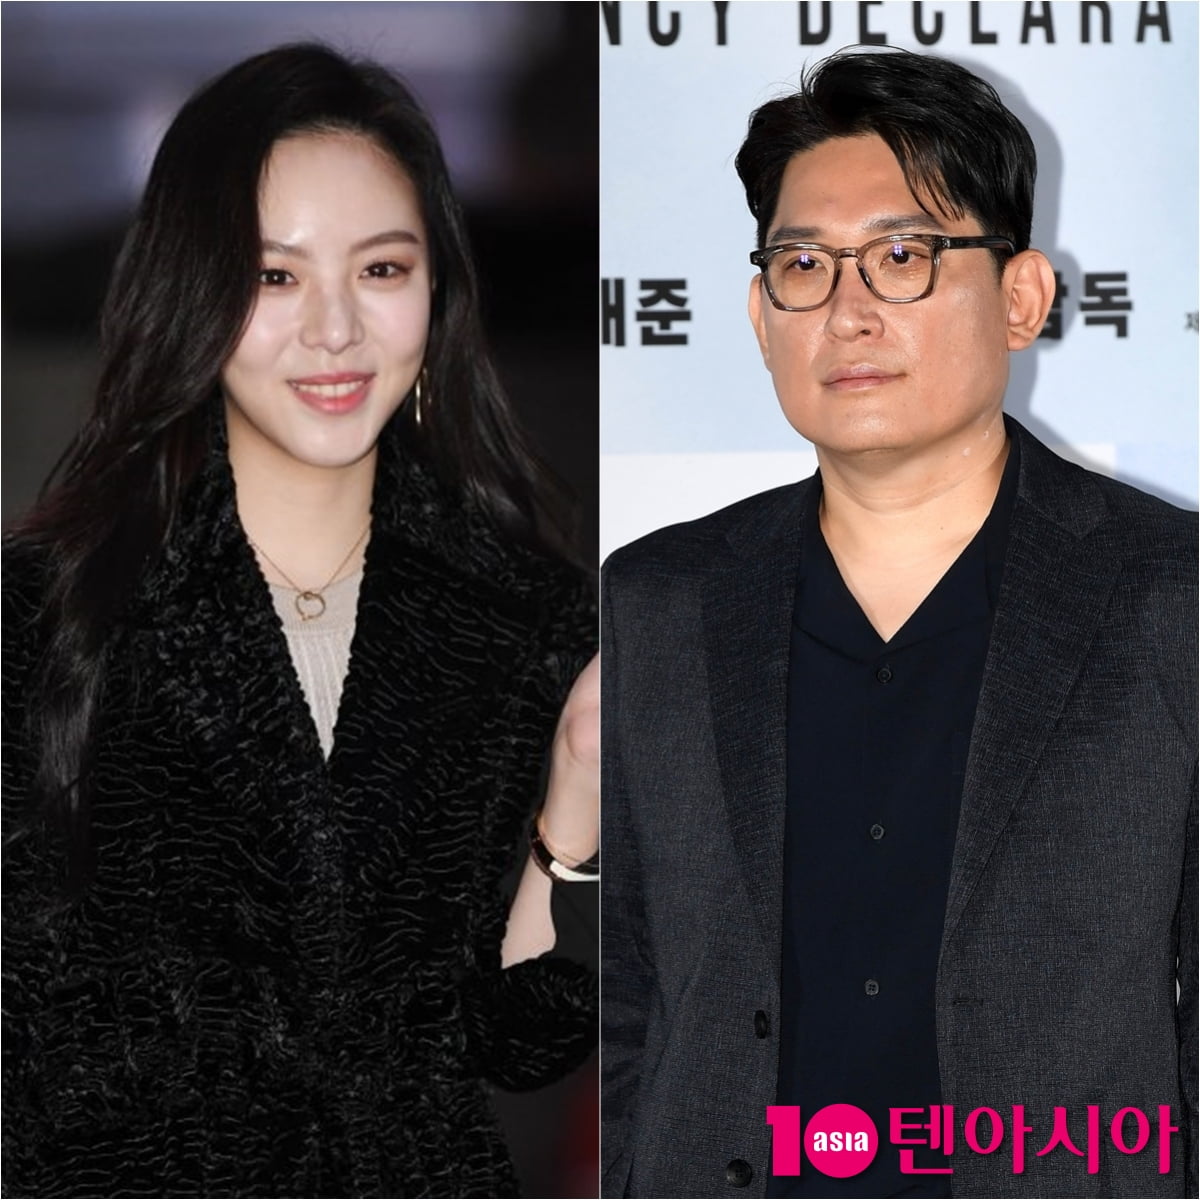 Is the 21-year-old car burdensome with director Han Jae-rim? Lee Yeol-eum 'Dating rumors cannot be confirmed'